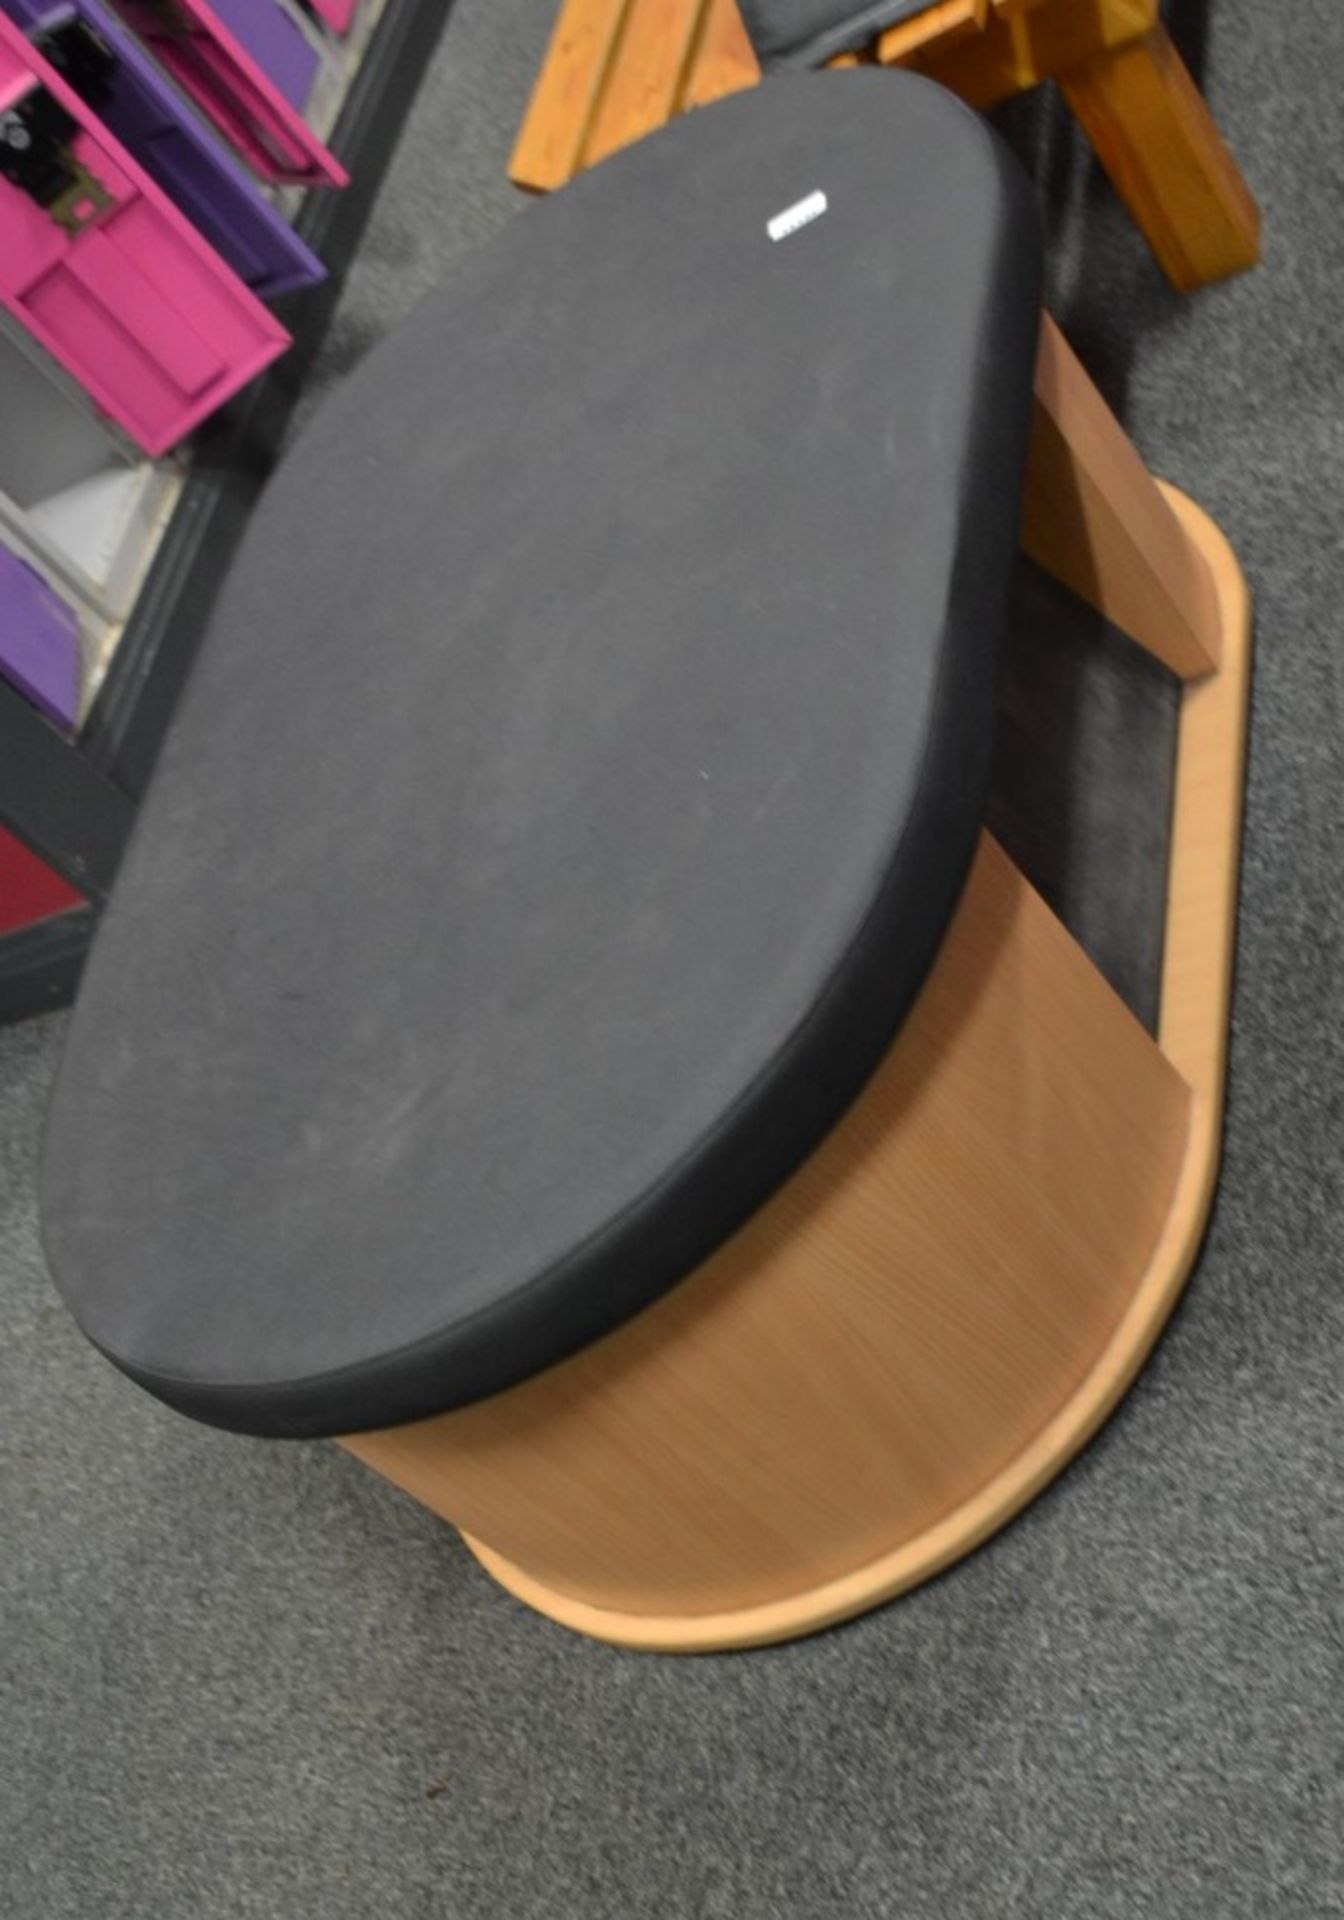 1 x Oval Changing Room Bench With Padded Top - Dimensions: L130 x W80 x H50cm - Ref: J2131/MCR - - Image 2 of 2